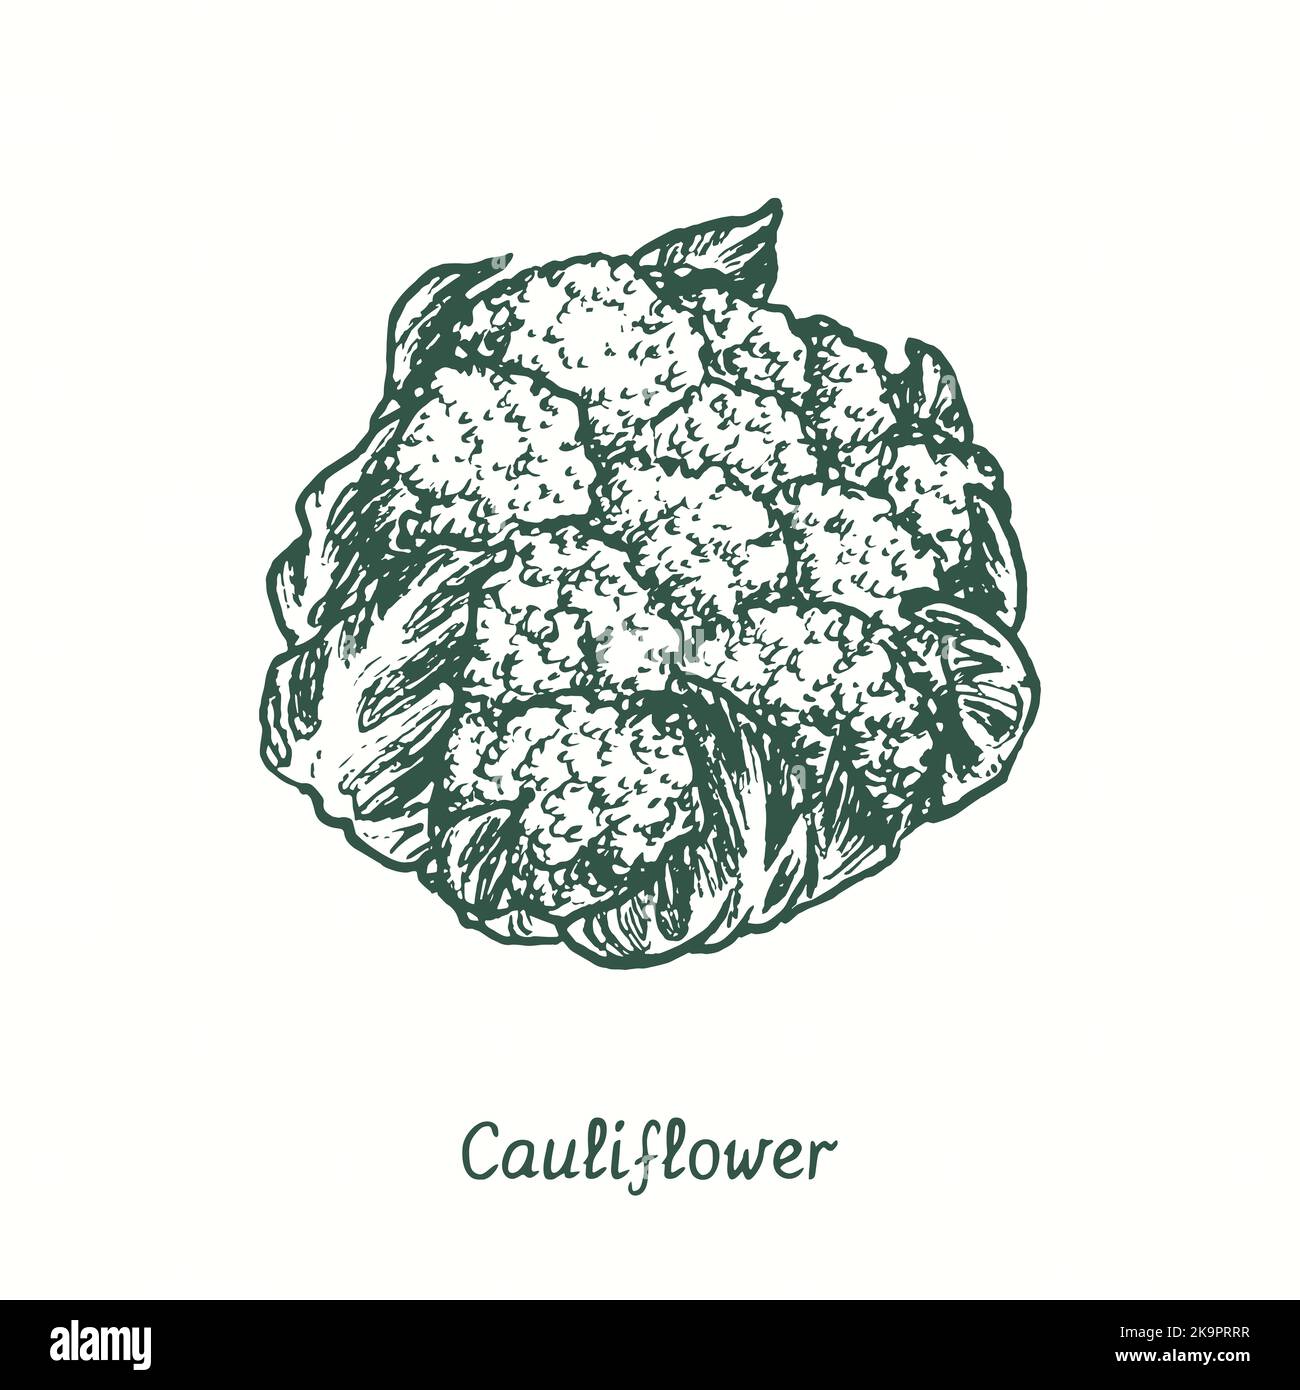 Cauliflower.  Ink black and white doodle drawing in woodcut style Stock Photo